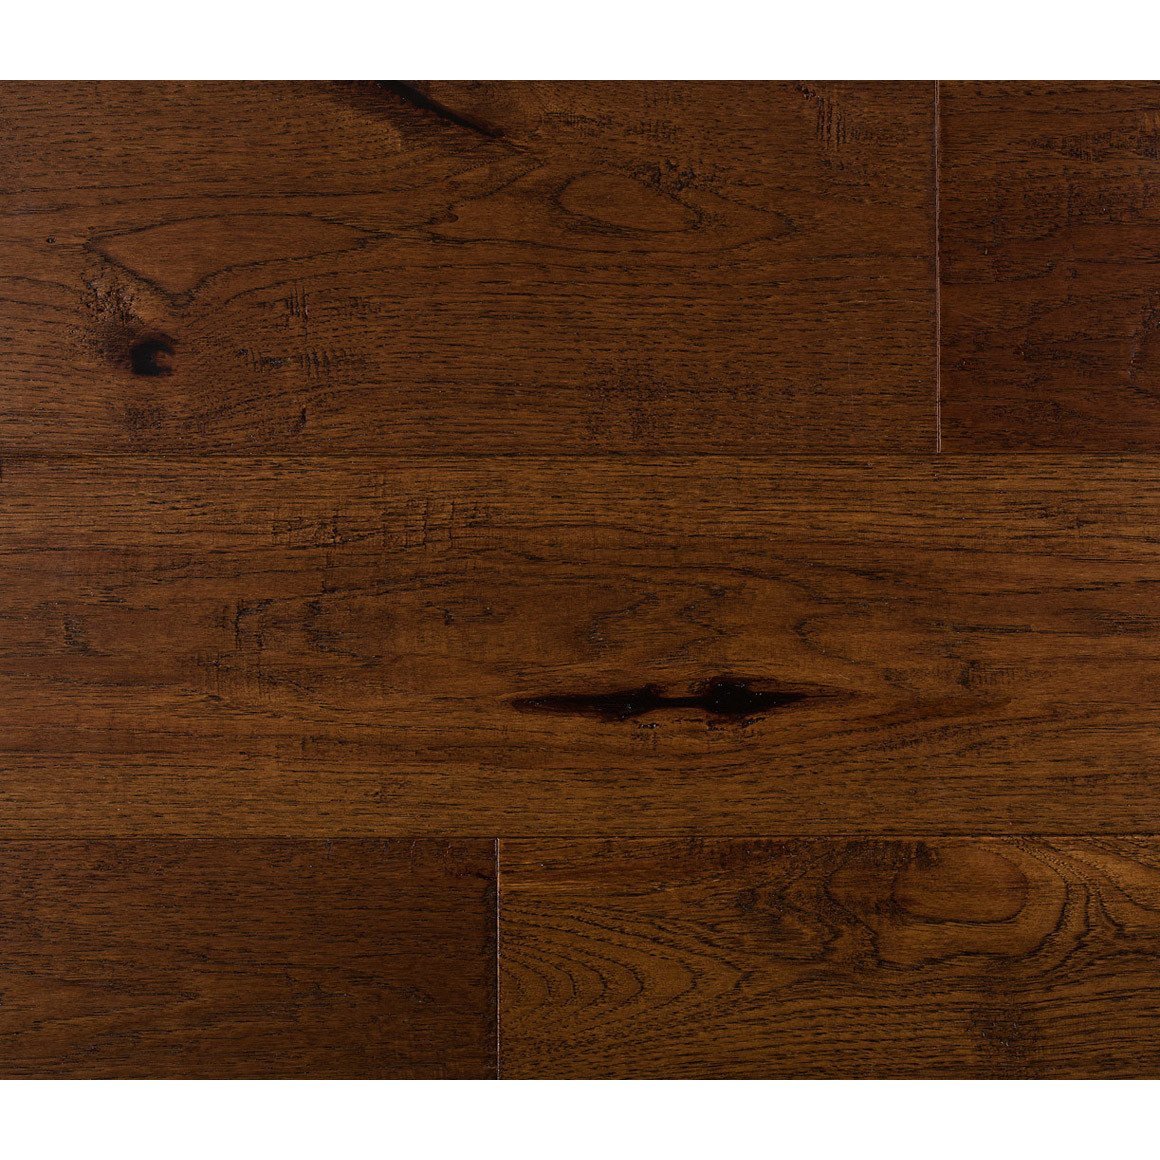 Naturally Aged Flooring Medallion Collection Lost Canyon